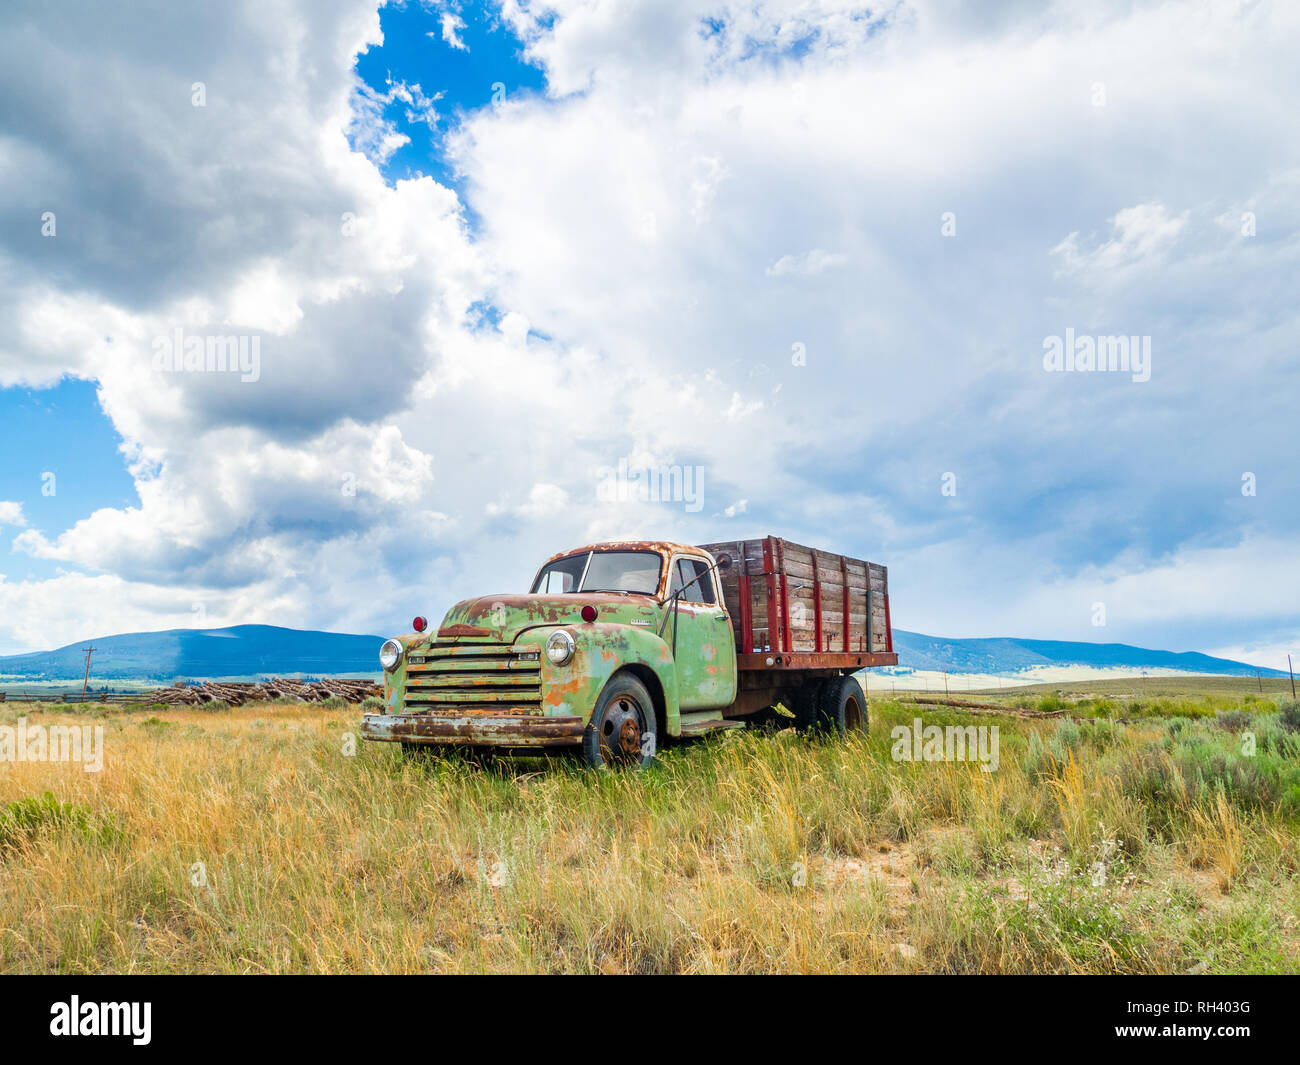 An old abandoned truck in North America Stock Photo